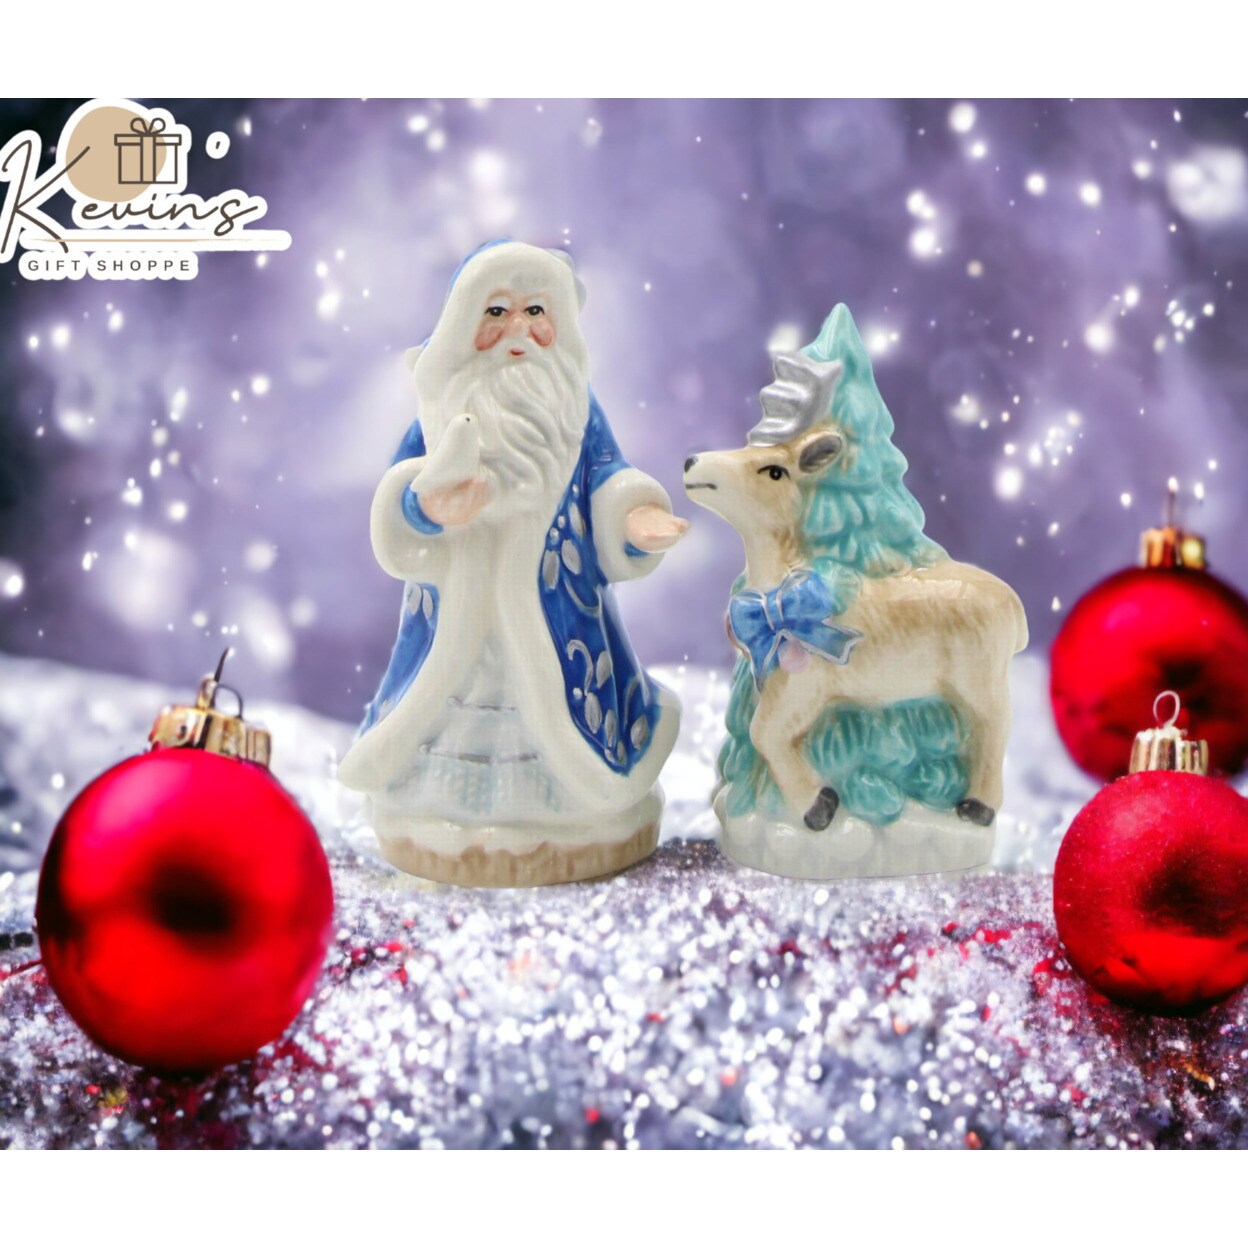 kevinsgiftshoppe Hand Painted Ceramic Blue Santa Claus with Reindeer and Tree Salt and Pepper Shakers Home Decor   Kitchen Decor